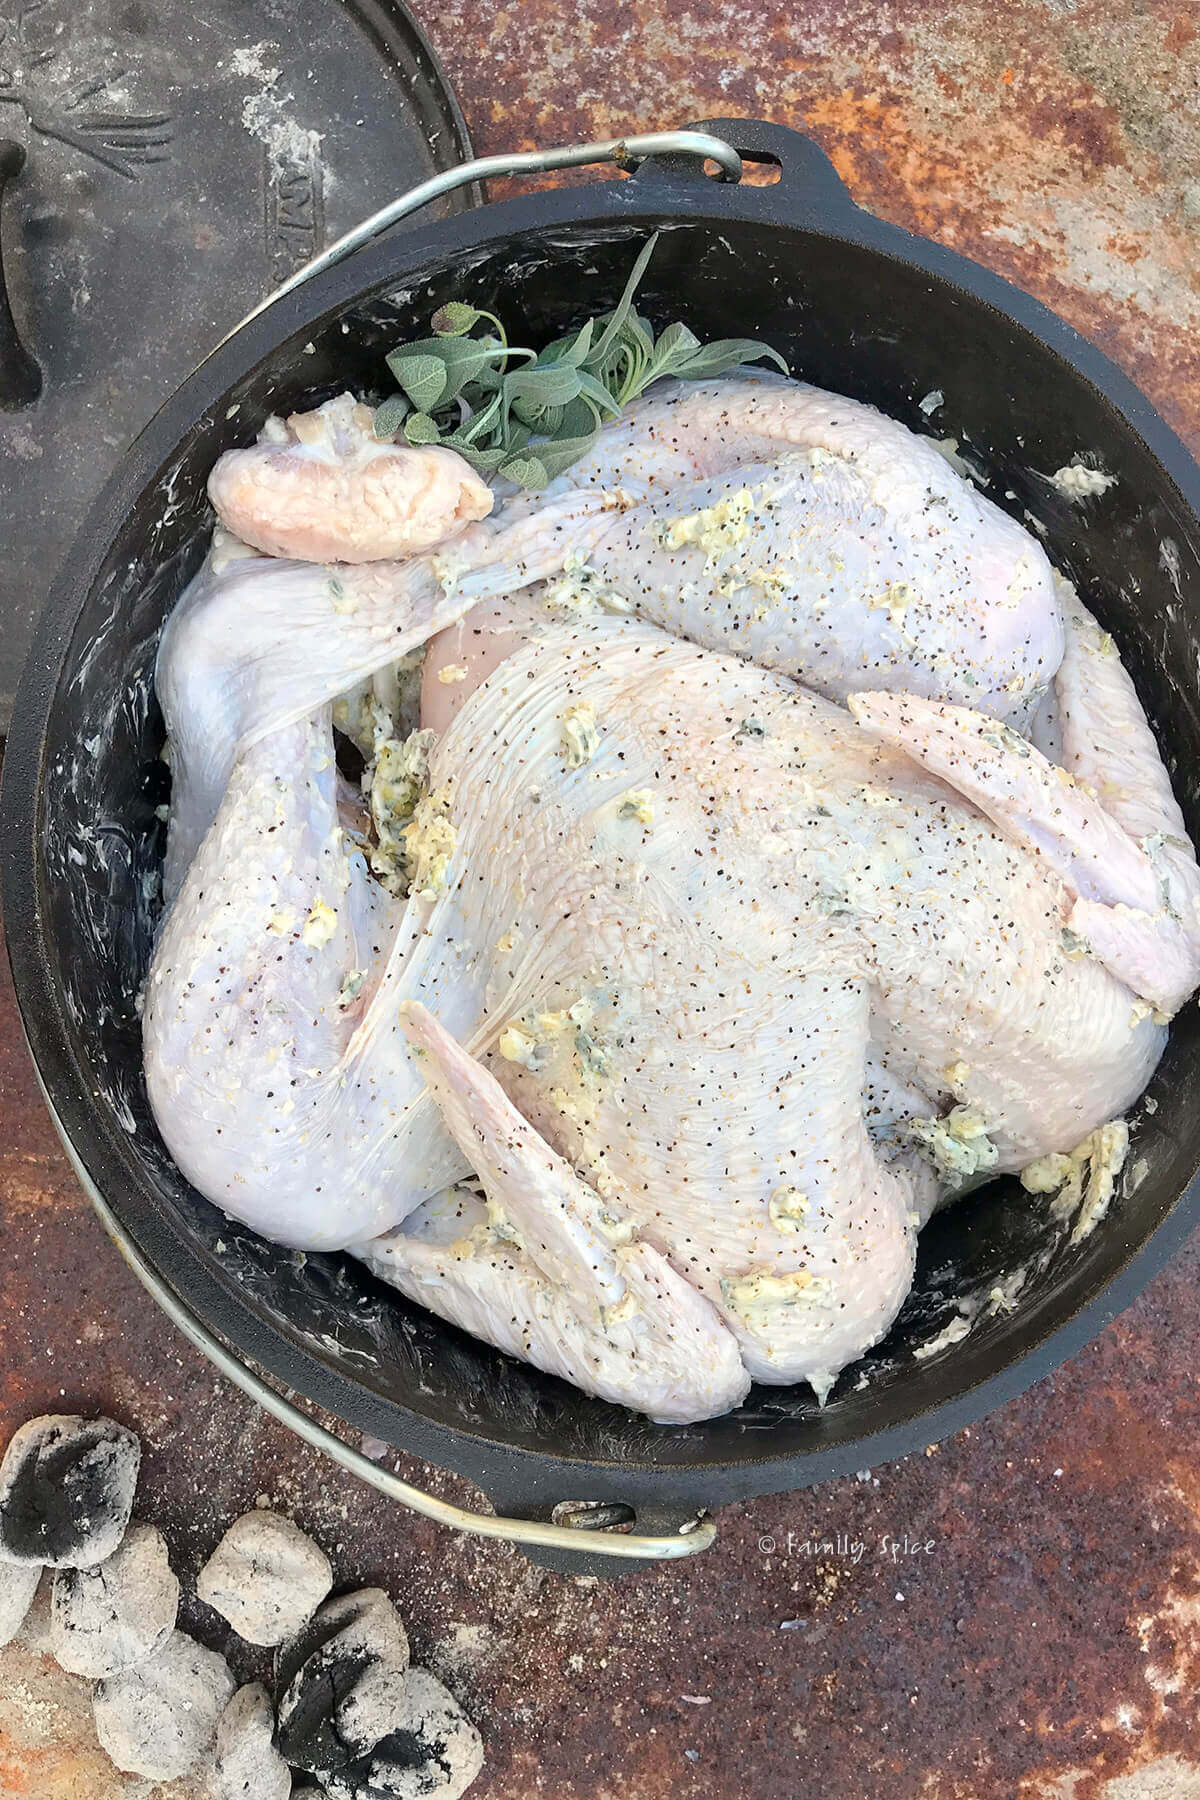 A roast turkey smothered in herb butter ready to roast in a cast iron Dutch oven